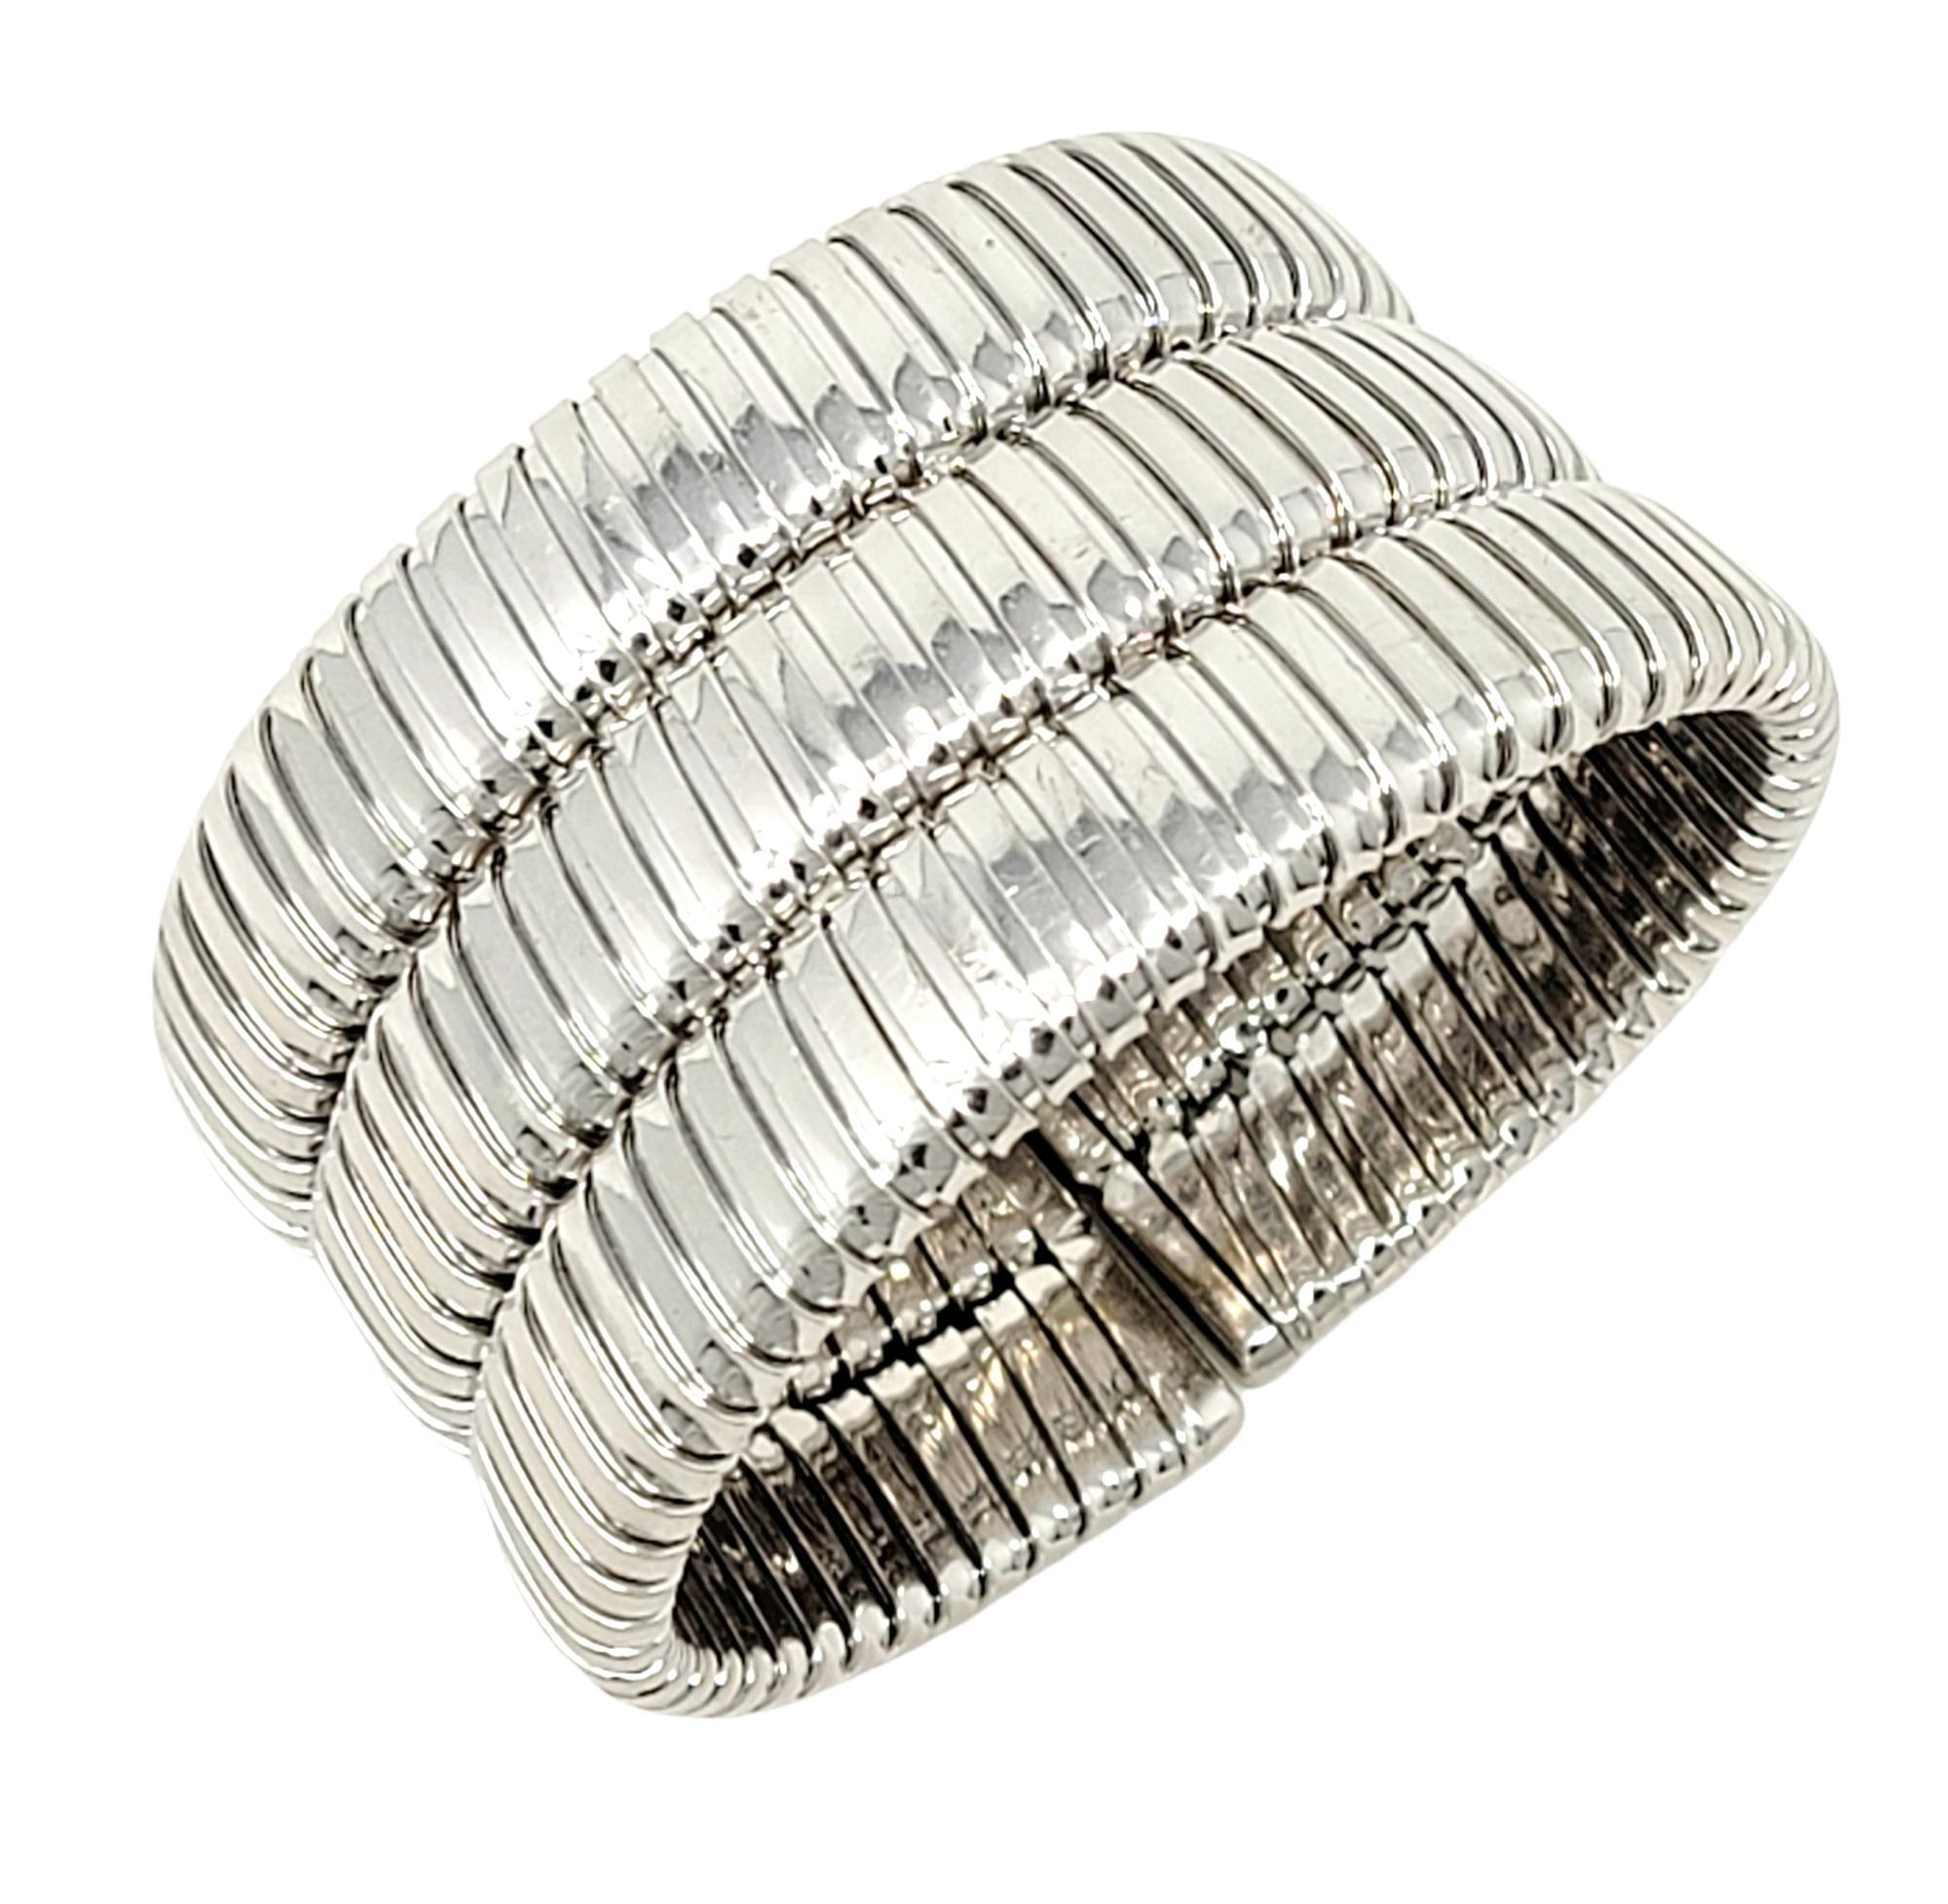 This bold, contemporary Carlos Weingrill statement piece fills the wrist with chic sophistication. Featuring a wide, polished 18 karat white gold finish with a textured multi-row ridged construction. Though large in size, this piece remains feminine